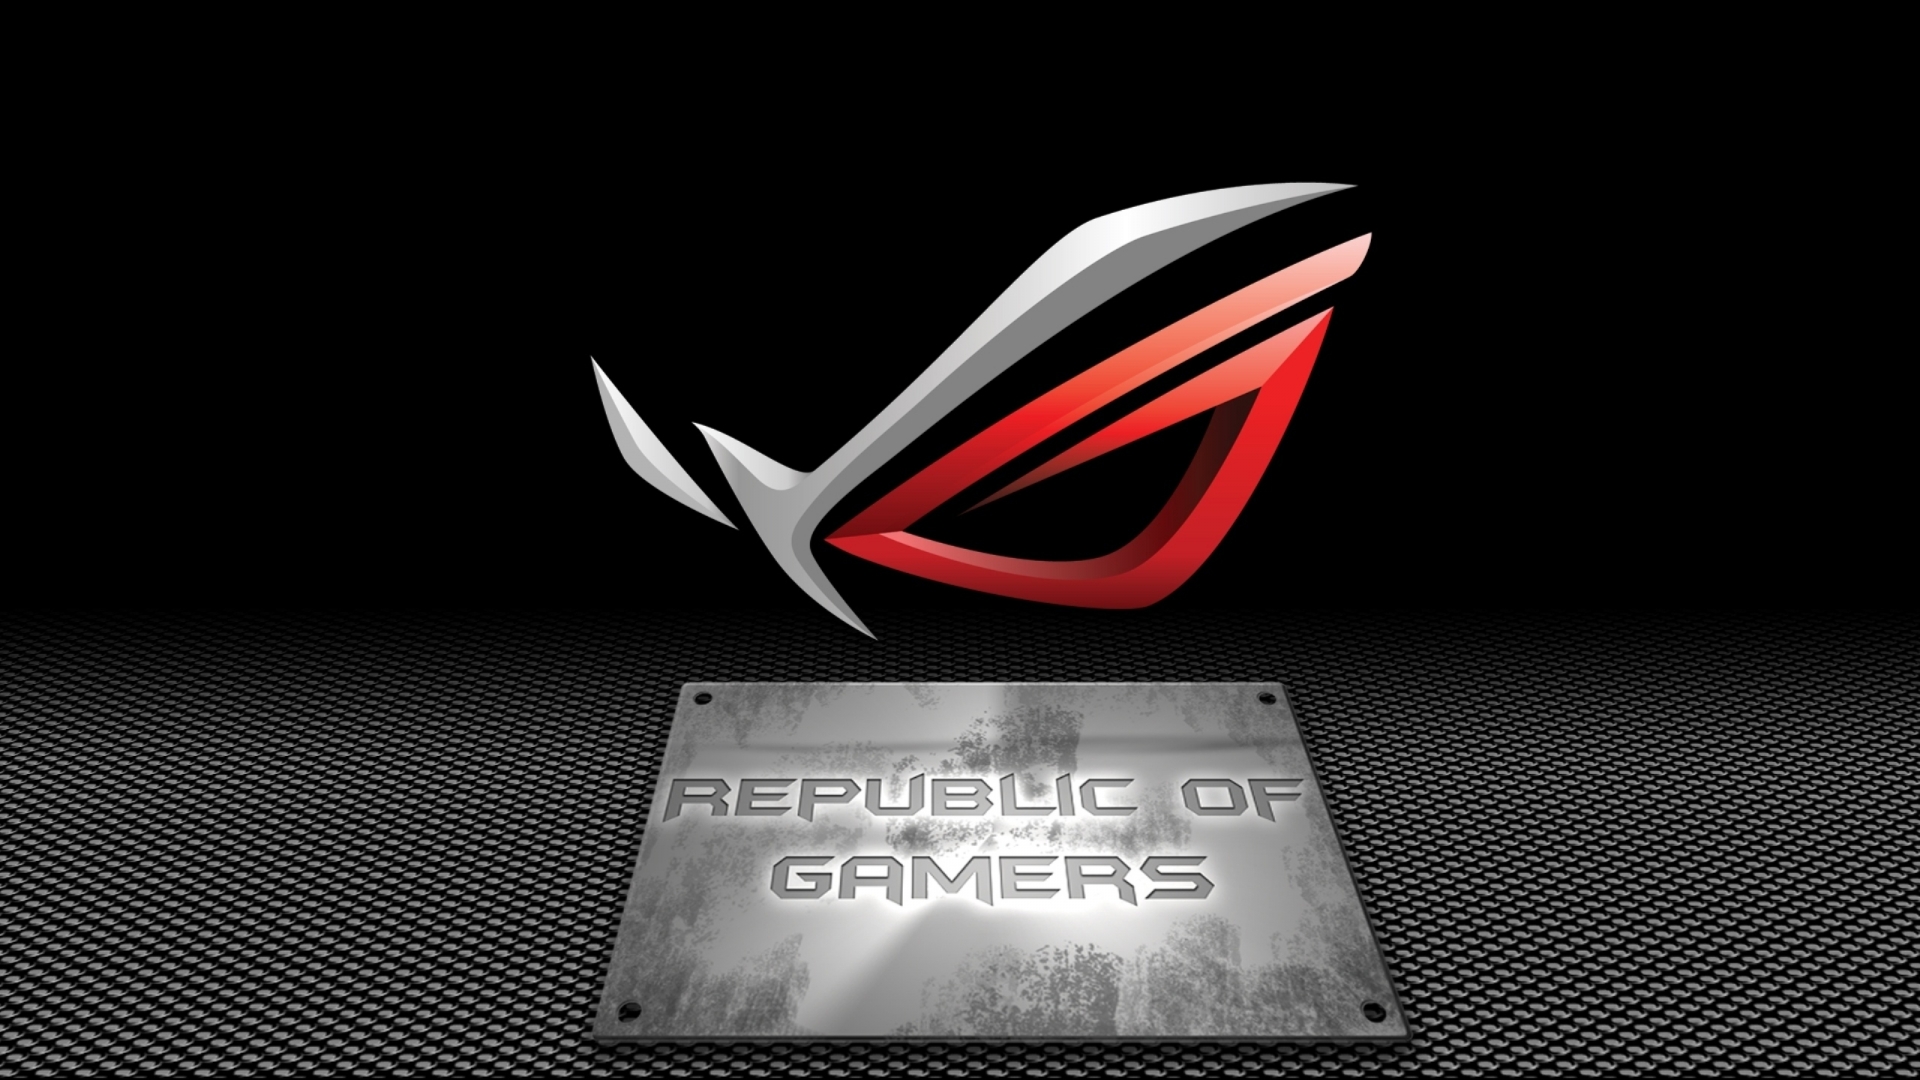 Republic of Gamers Asus for 1920 x 1080 HDTV 1080p resolution